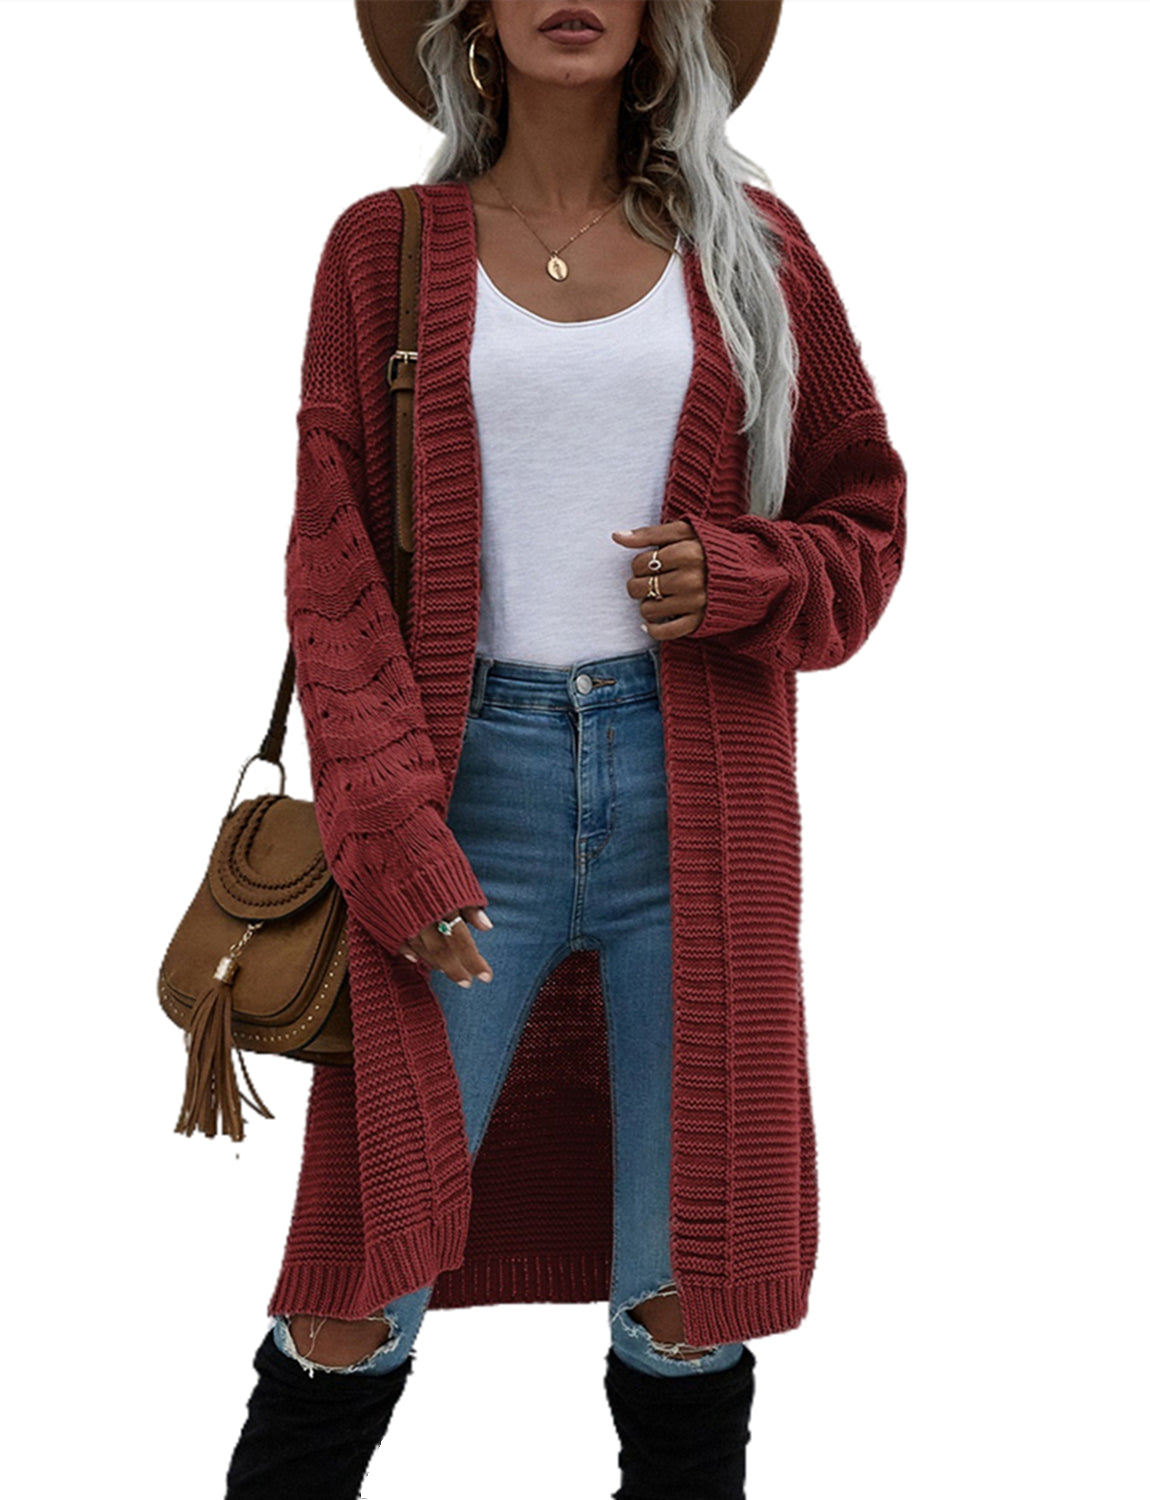 Women's Oversize Cardigan Sweater Loose Casual Long Sleeve Solid Color Top